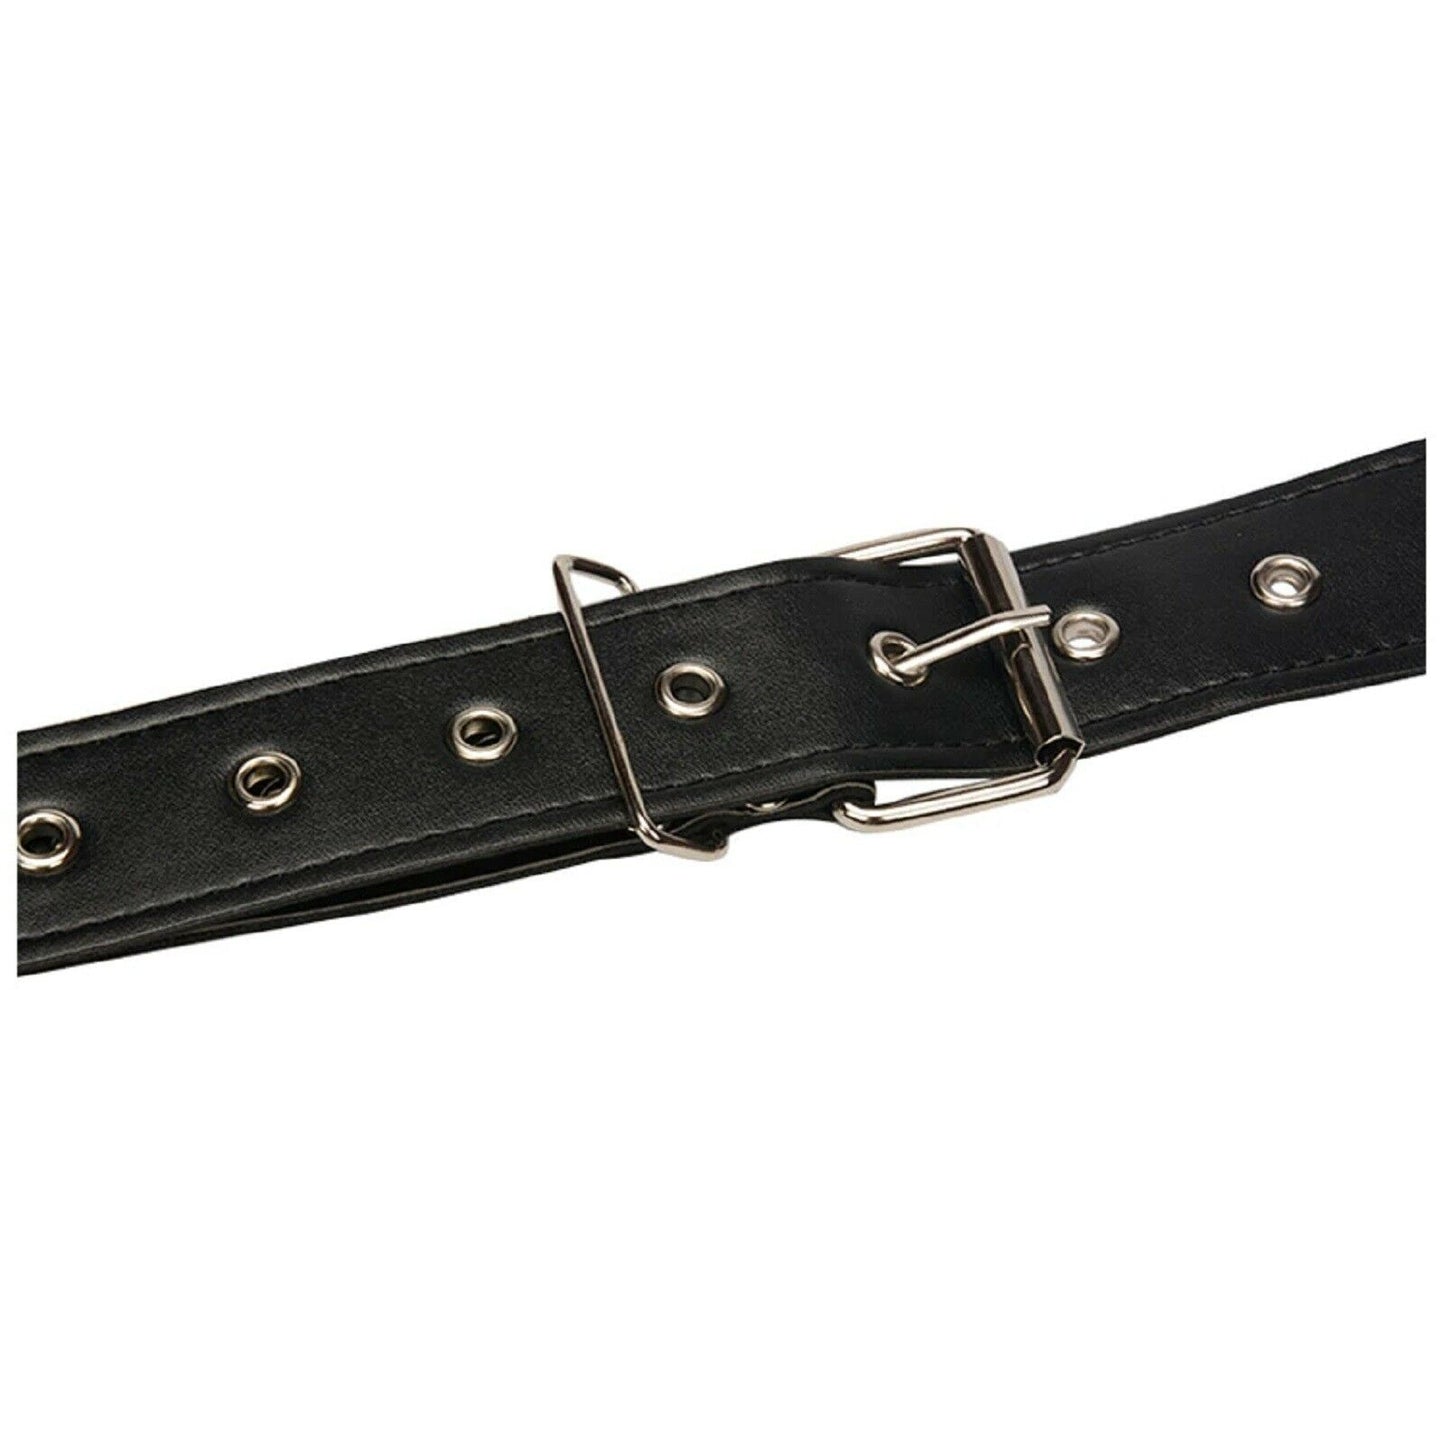 Unisex Chest Harness Faux Leather BDMS Pup Play Strap Clubwear Gay Adult Sex Toy